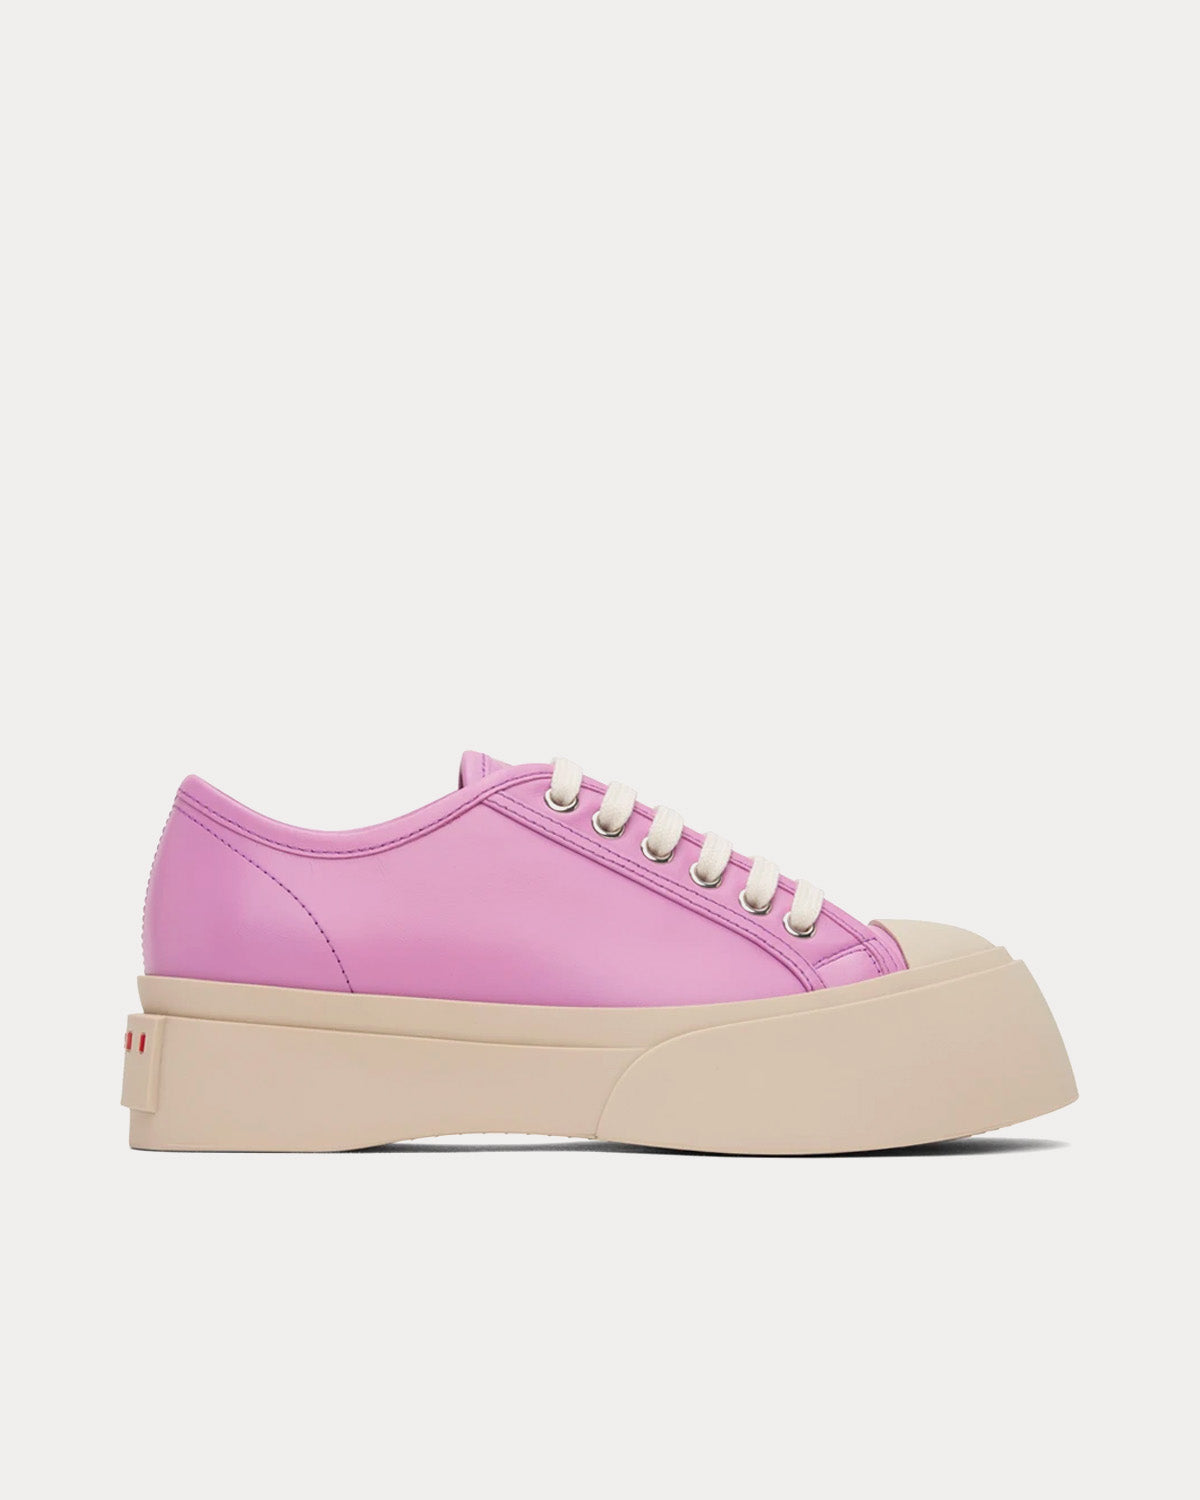 Marni - Pablo Leather Lilac Low Top Sneakers